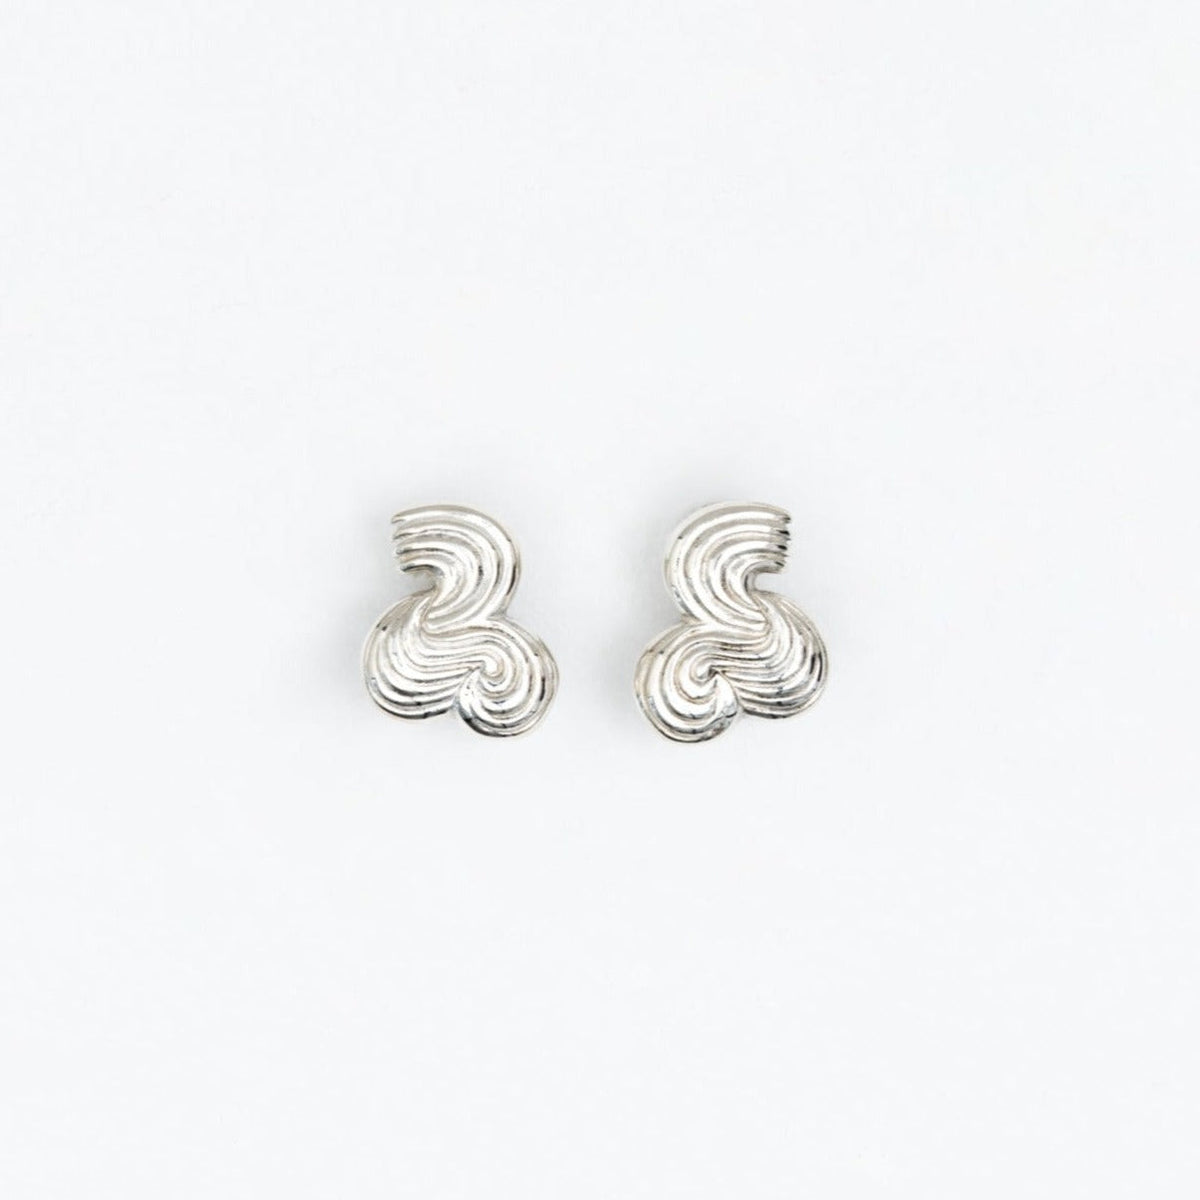 BETZY STUDS - SILVER